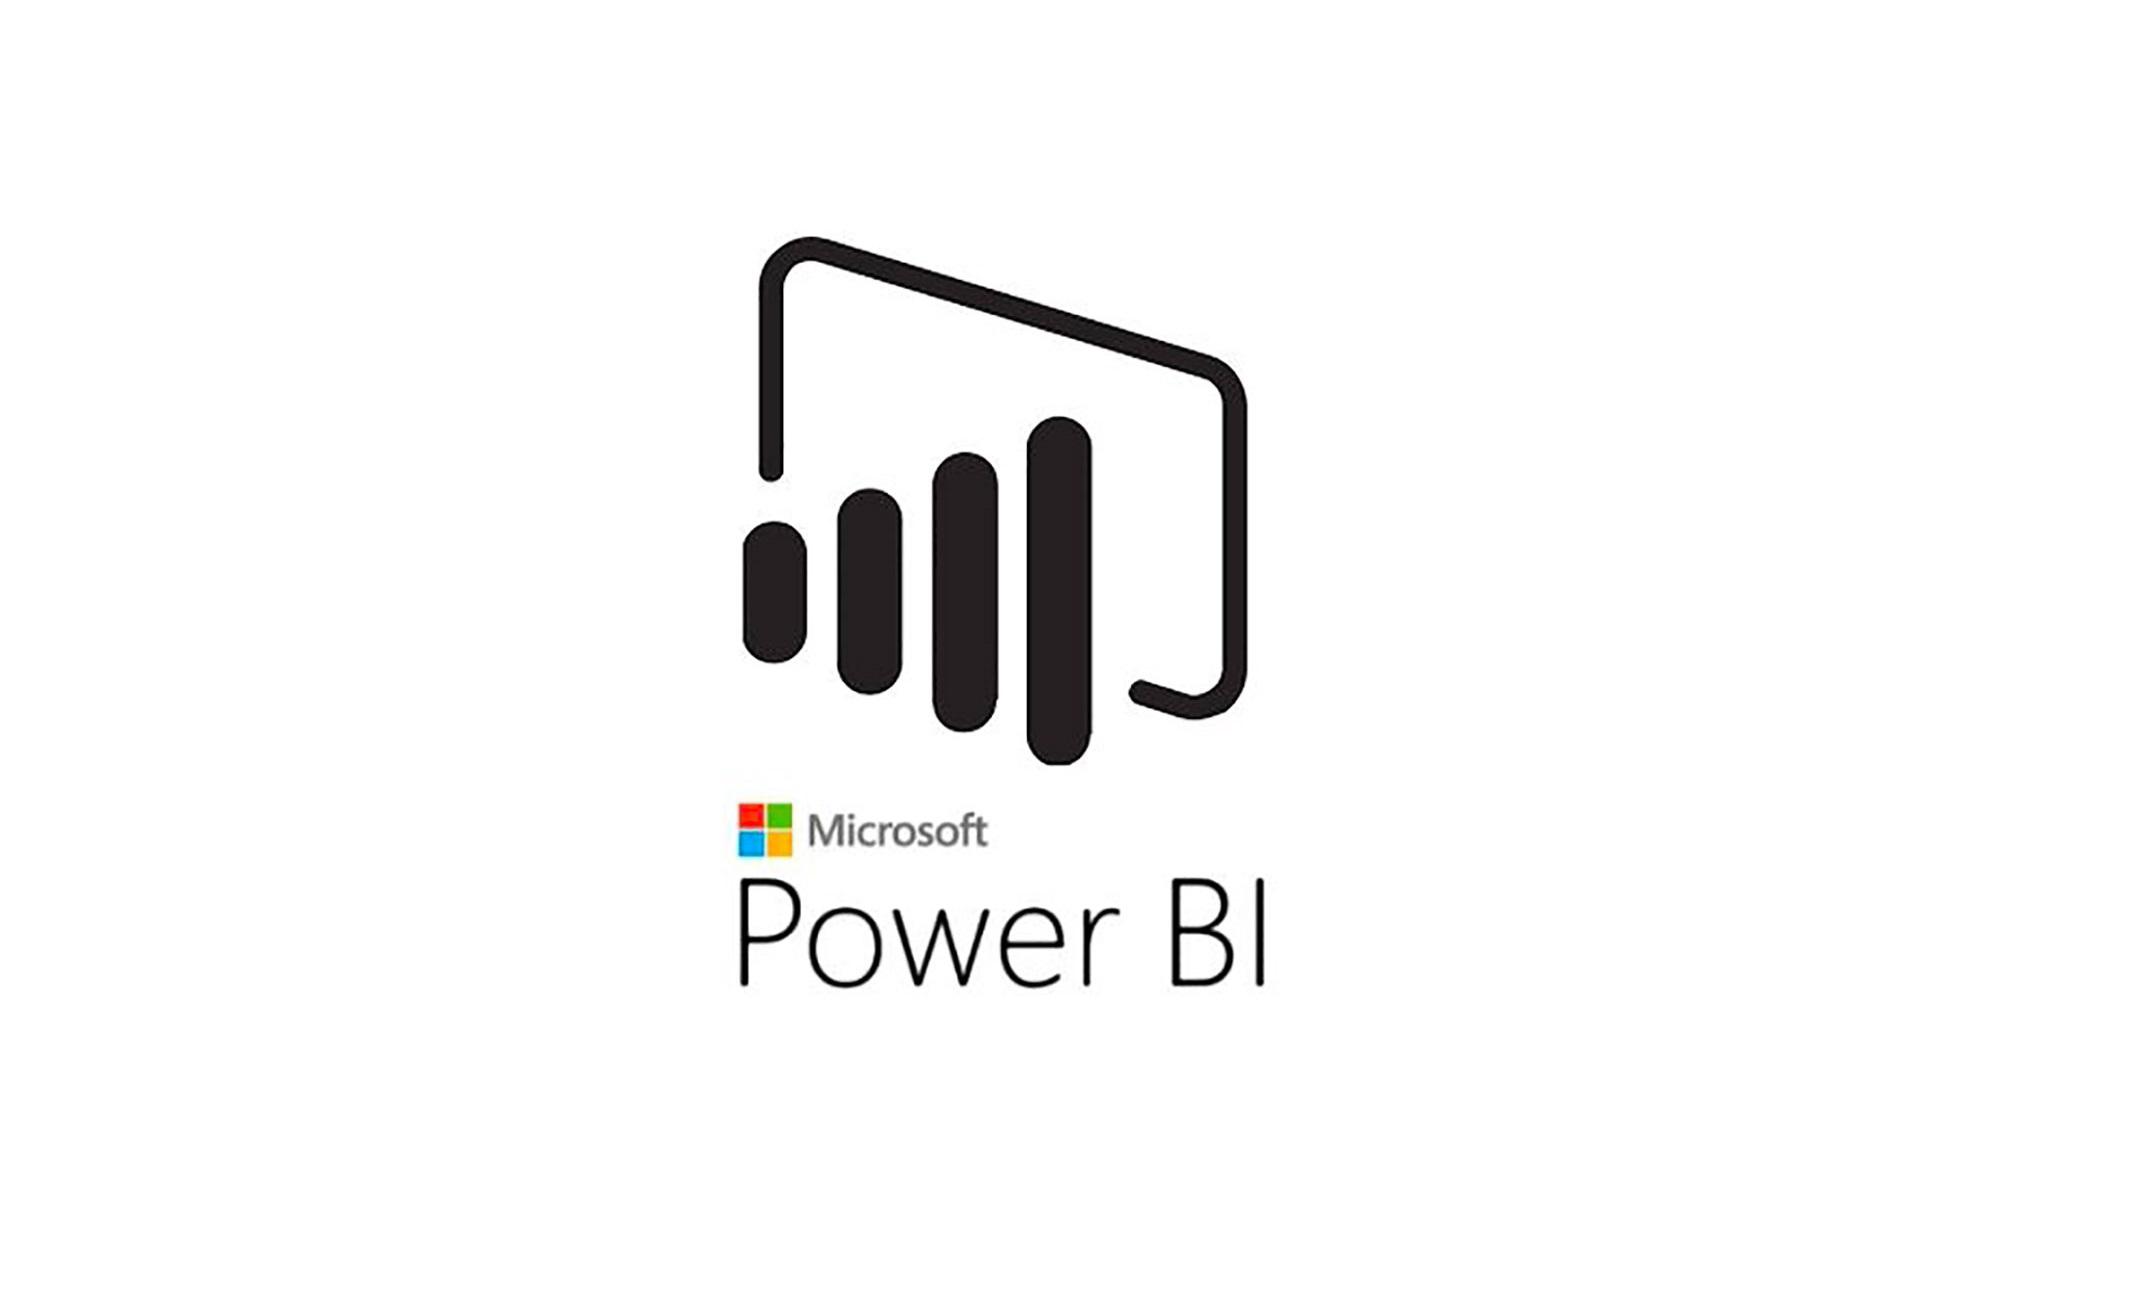 Microsoft Power BI Training in Corvallis | Introduction to Power BI training for beginners | Getting started with Power BI | What is Power BI | January 20, 2020 - February 12, 2020